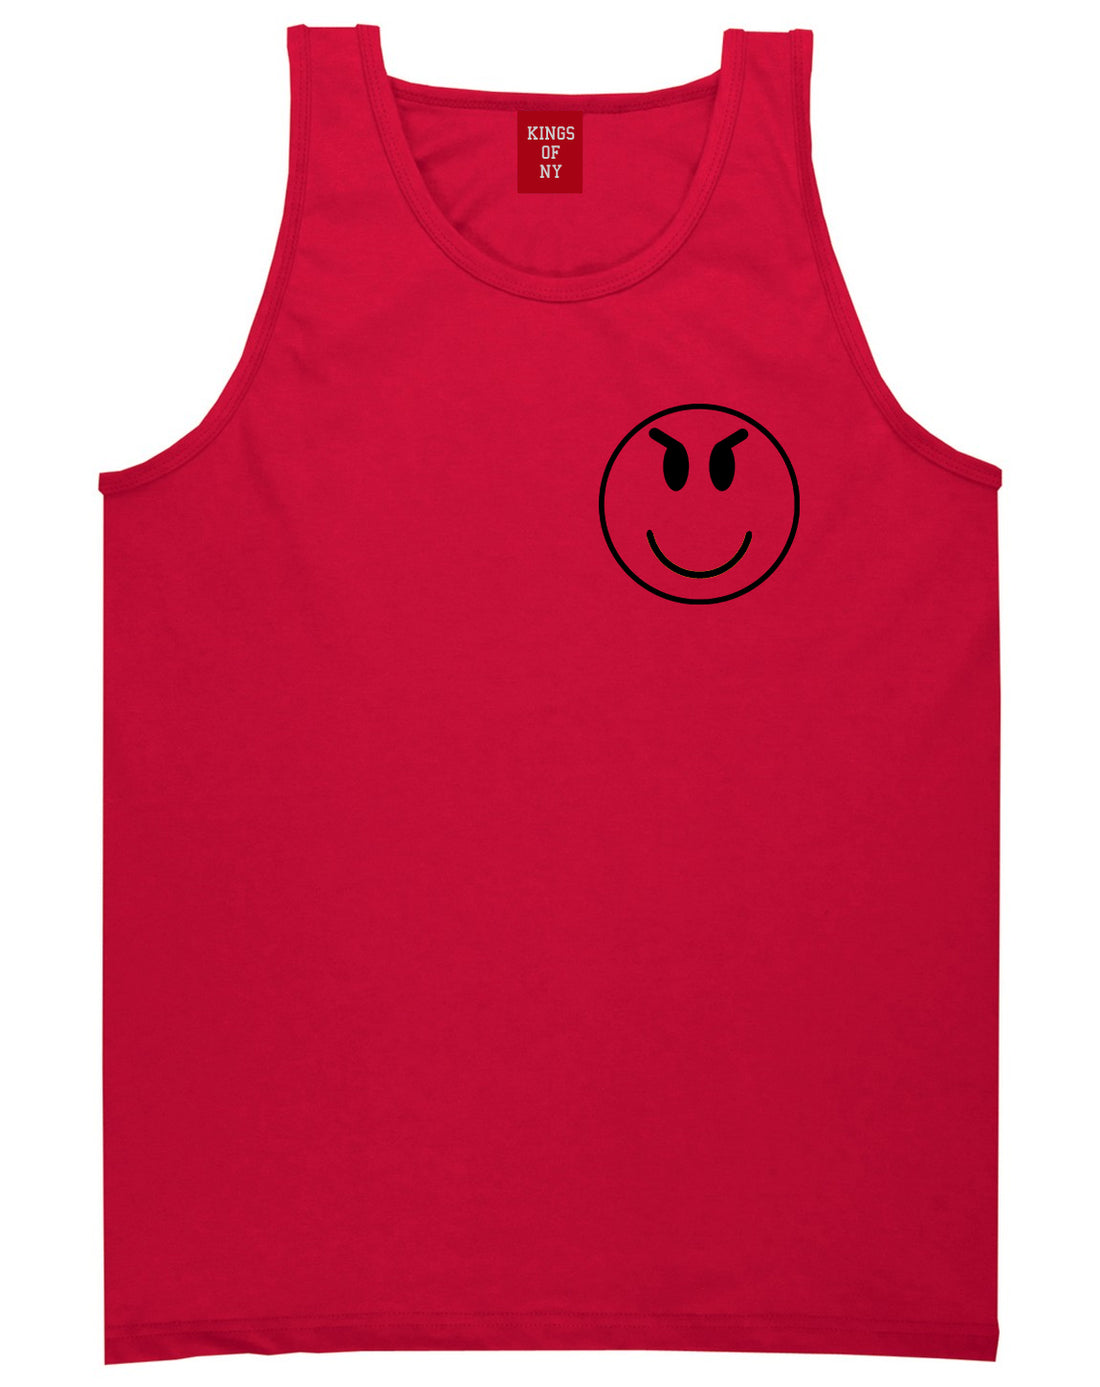 Evil Face Emoji Chest Mens Red Tank Top Shirt by KINGS OF NY